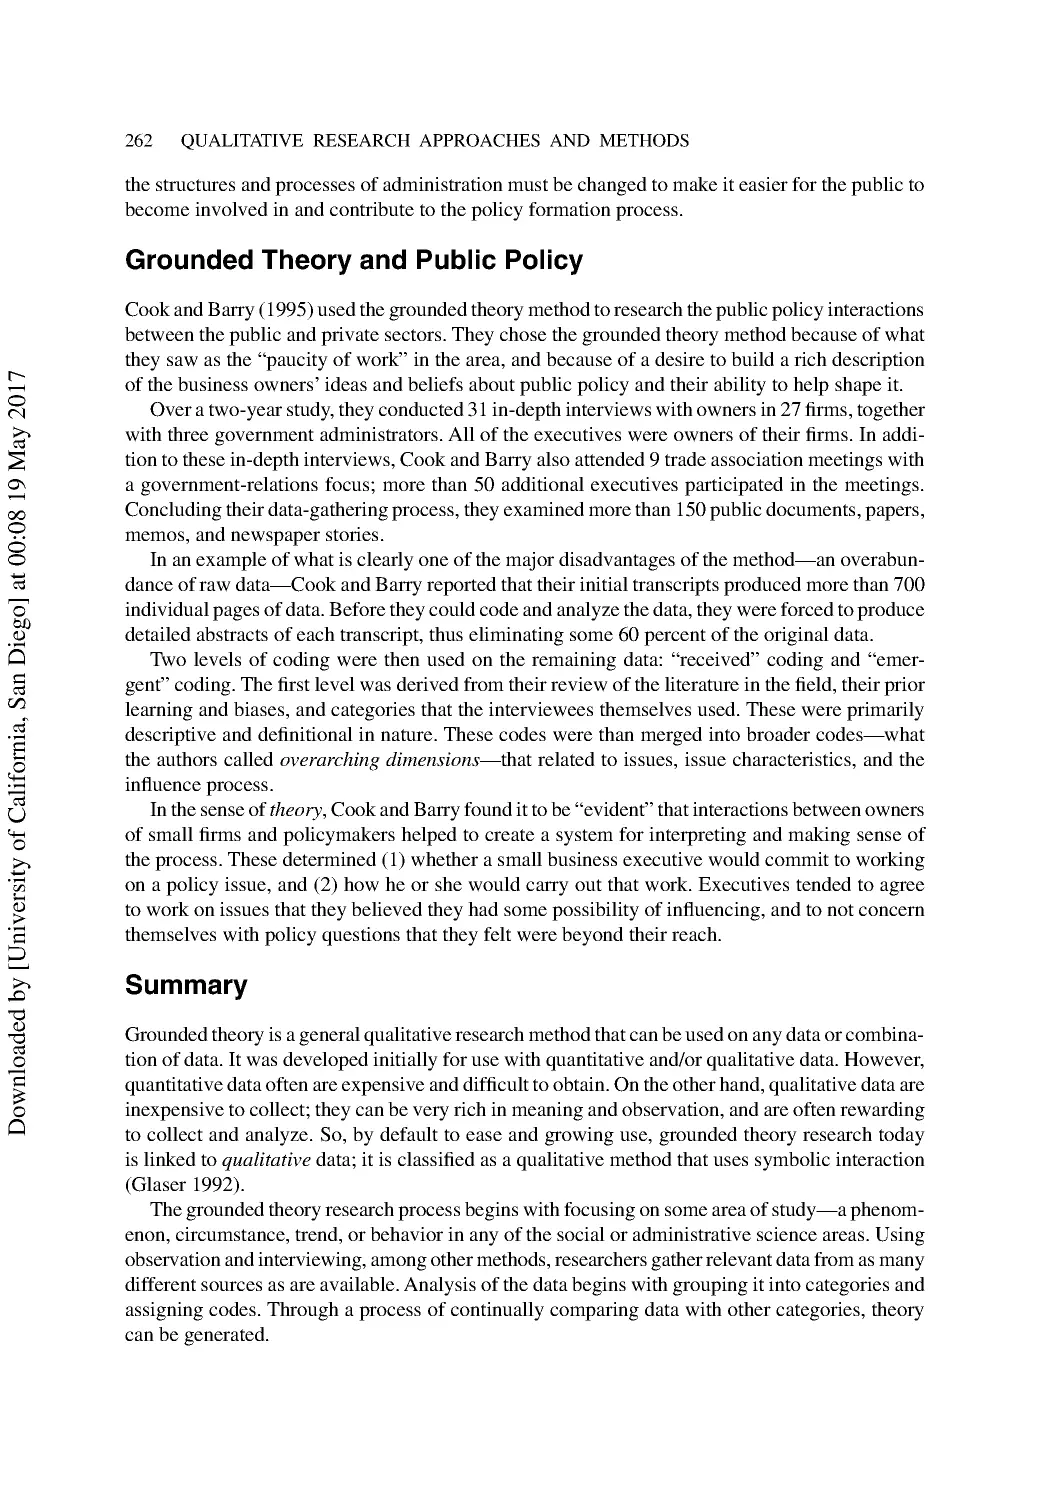 Grounded Theory and Public Policy
Summary